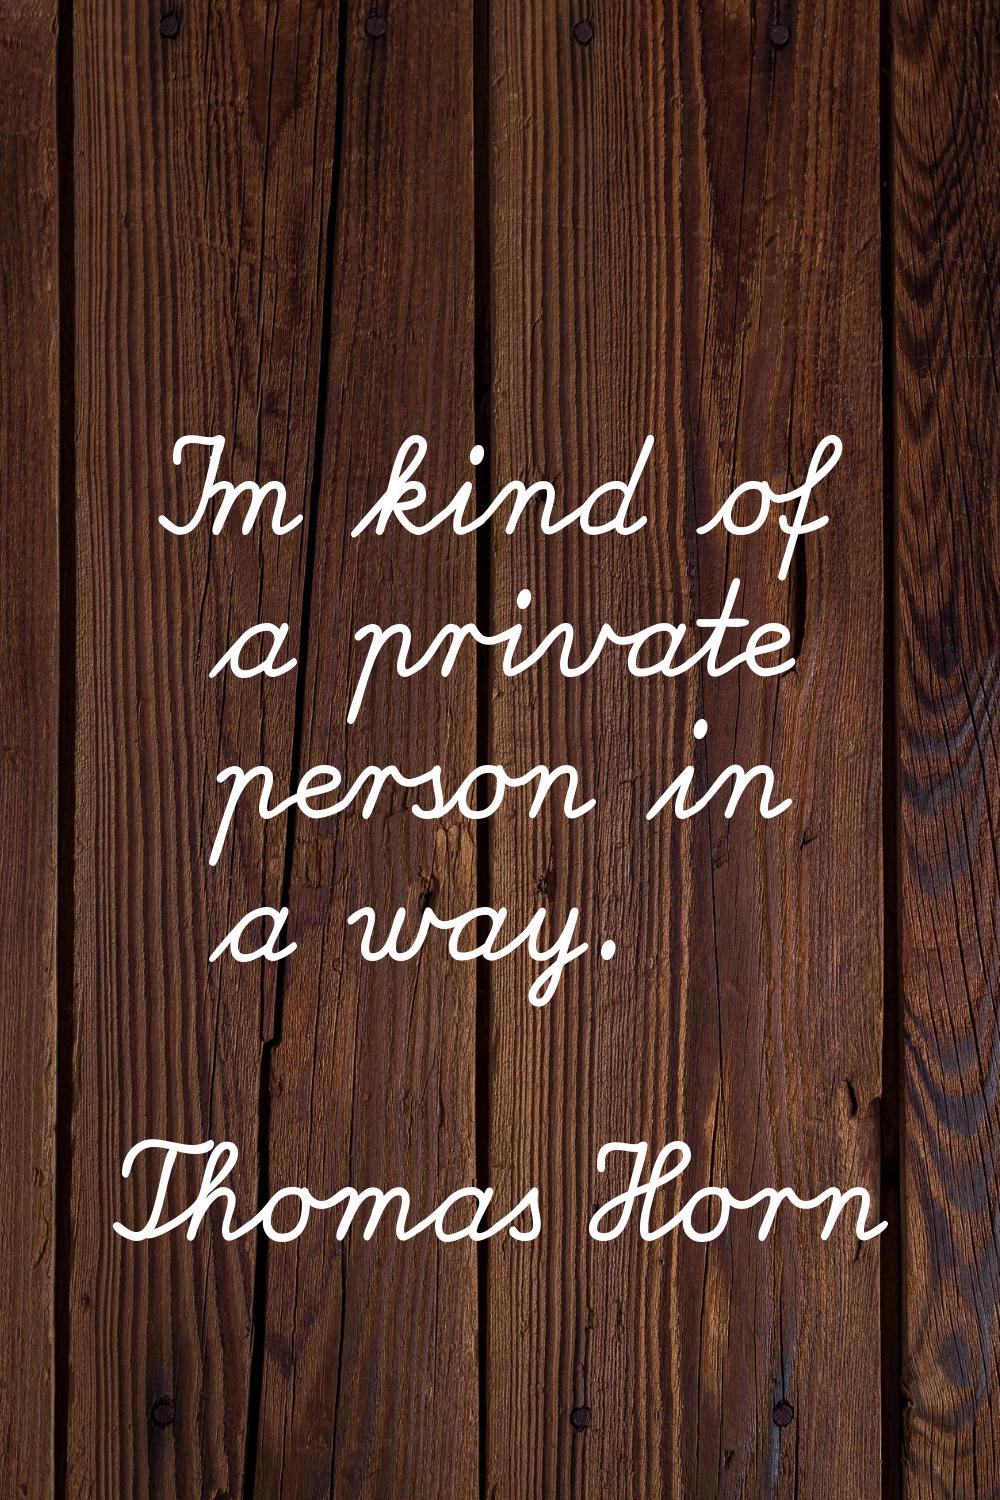 I'm kind of a private person in a way.